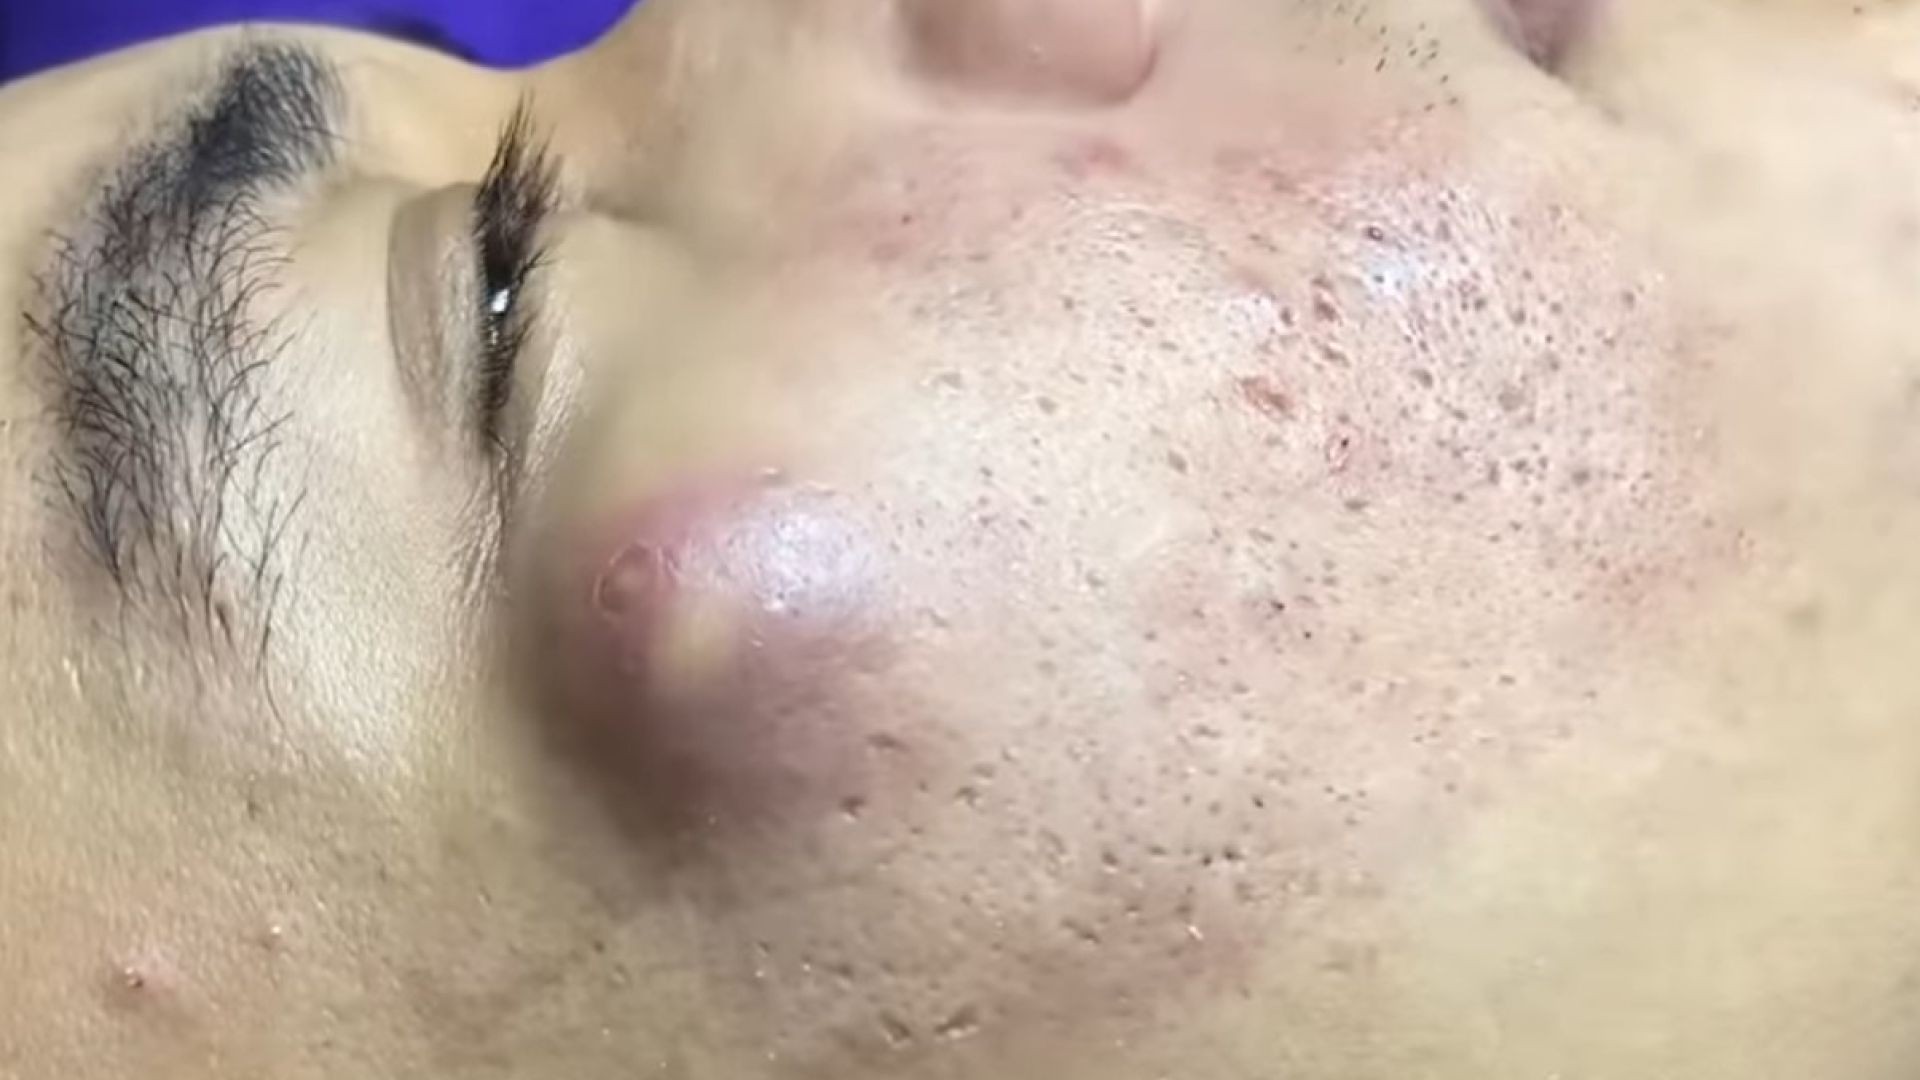 Removing large cysts for boys and whiteheads extraction (233) | Loan Nguyen